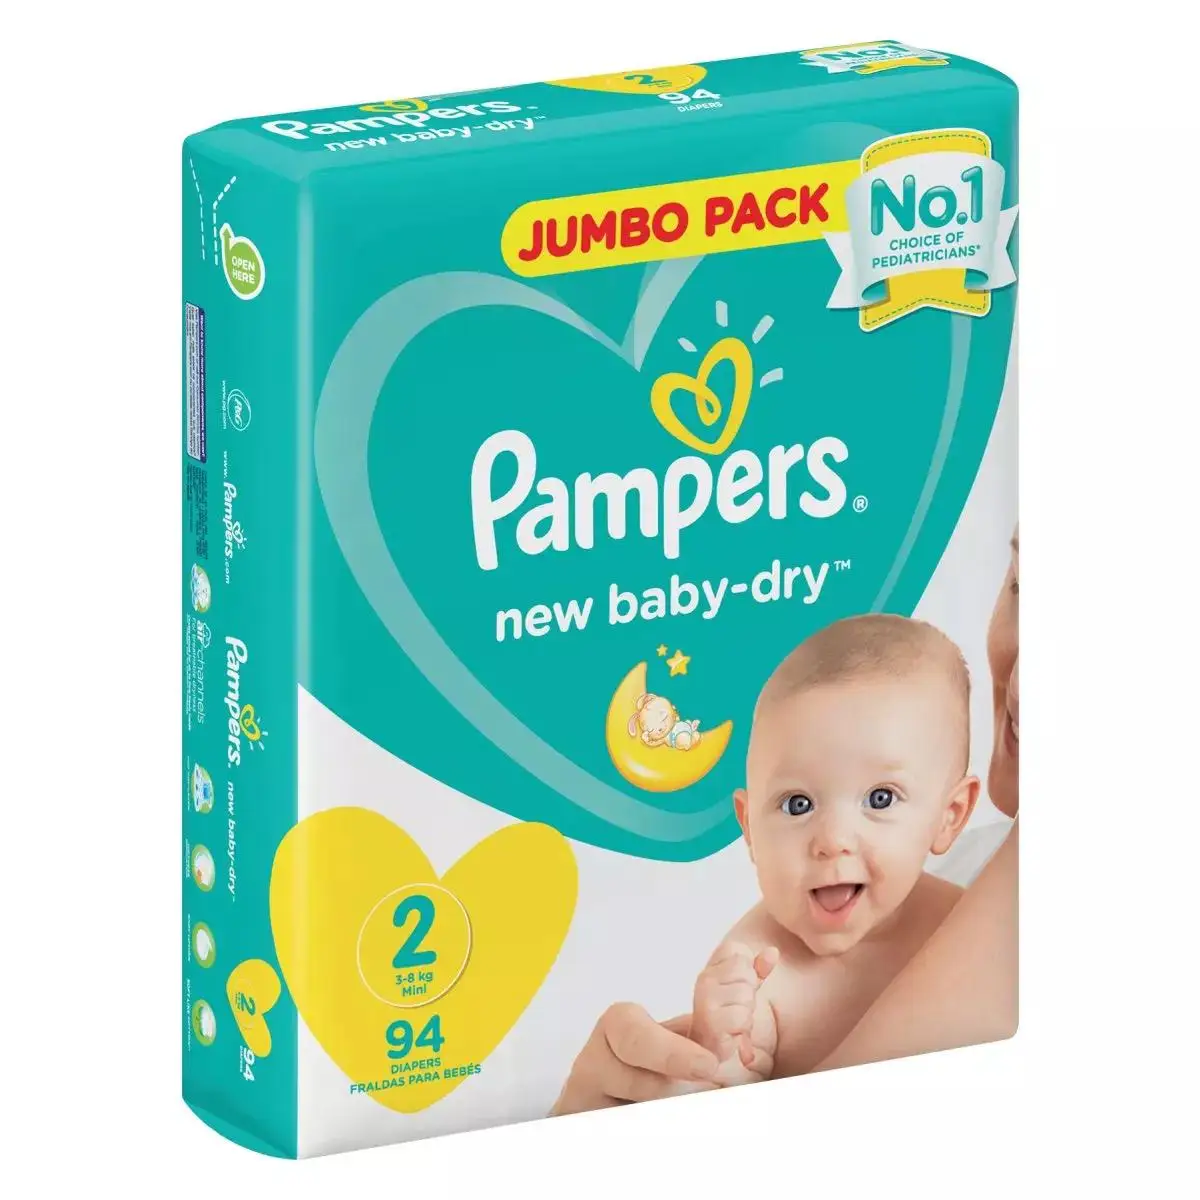 Original Quality Pampers - Baby Diapers High Absorbency Disposable Baby ...